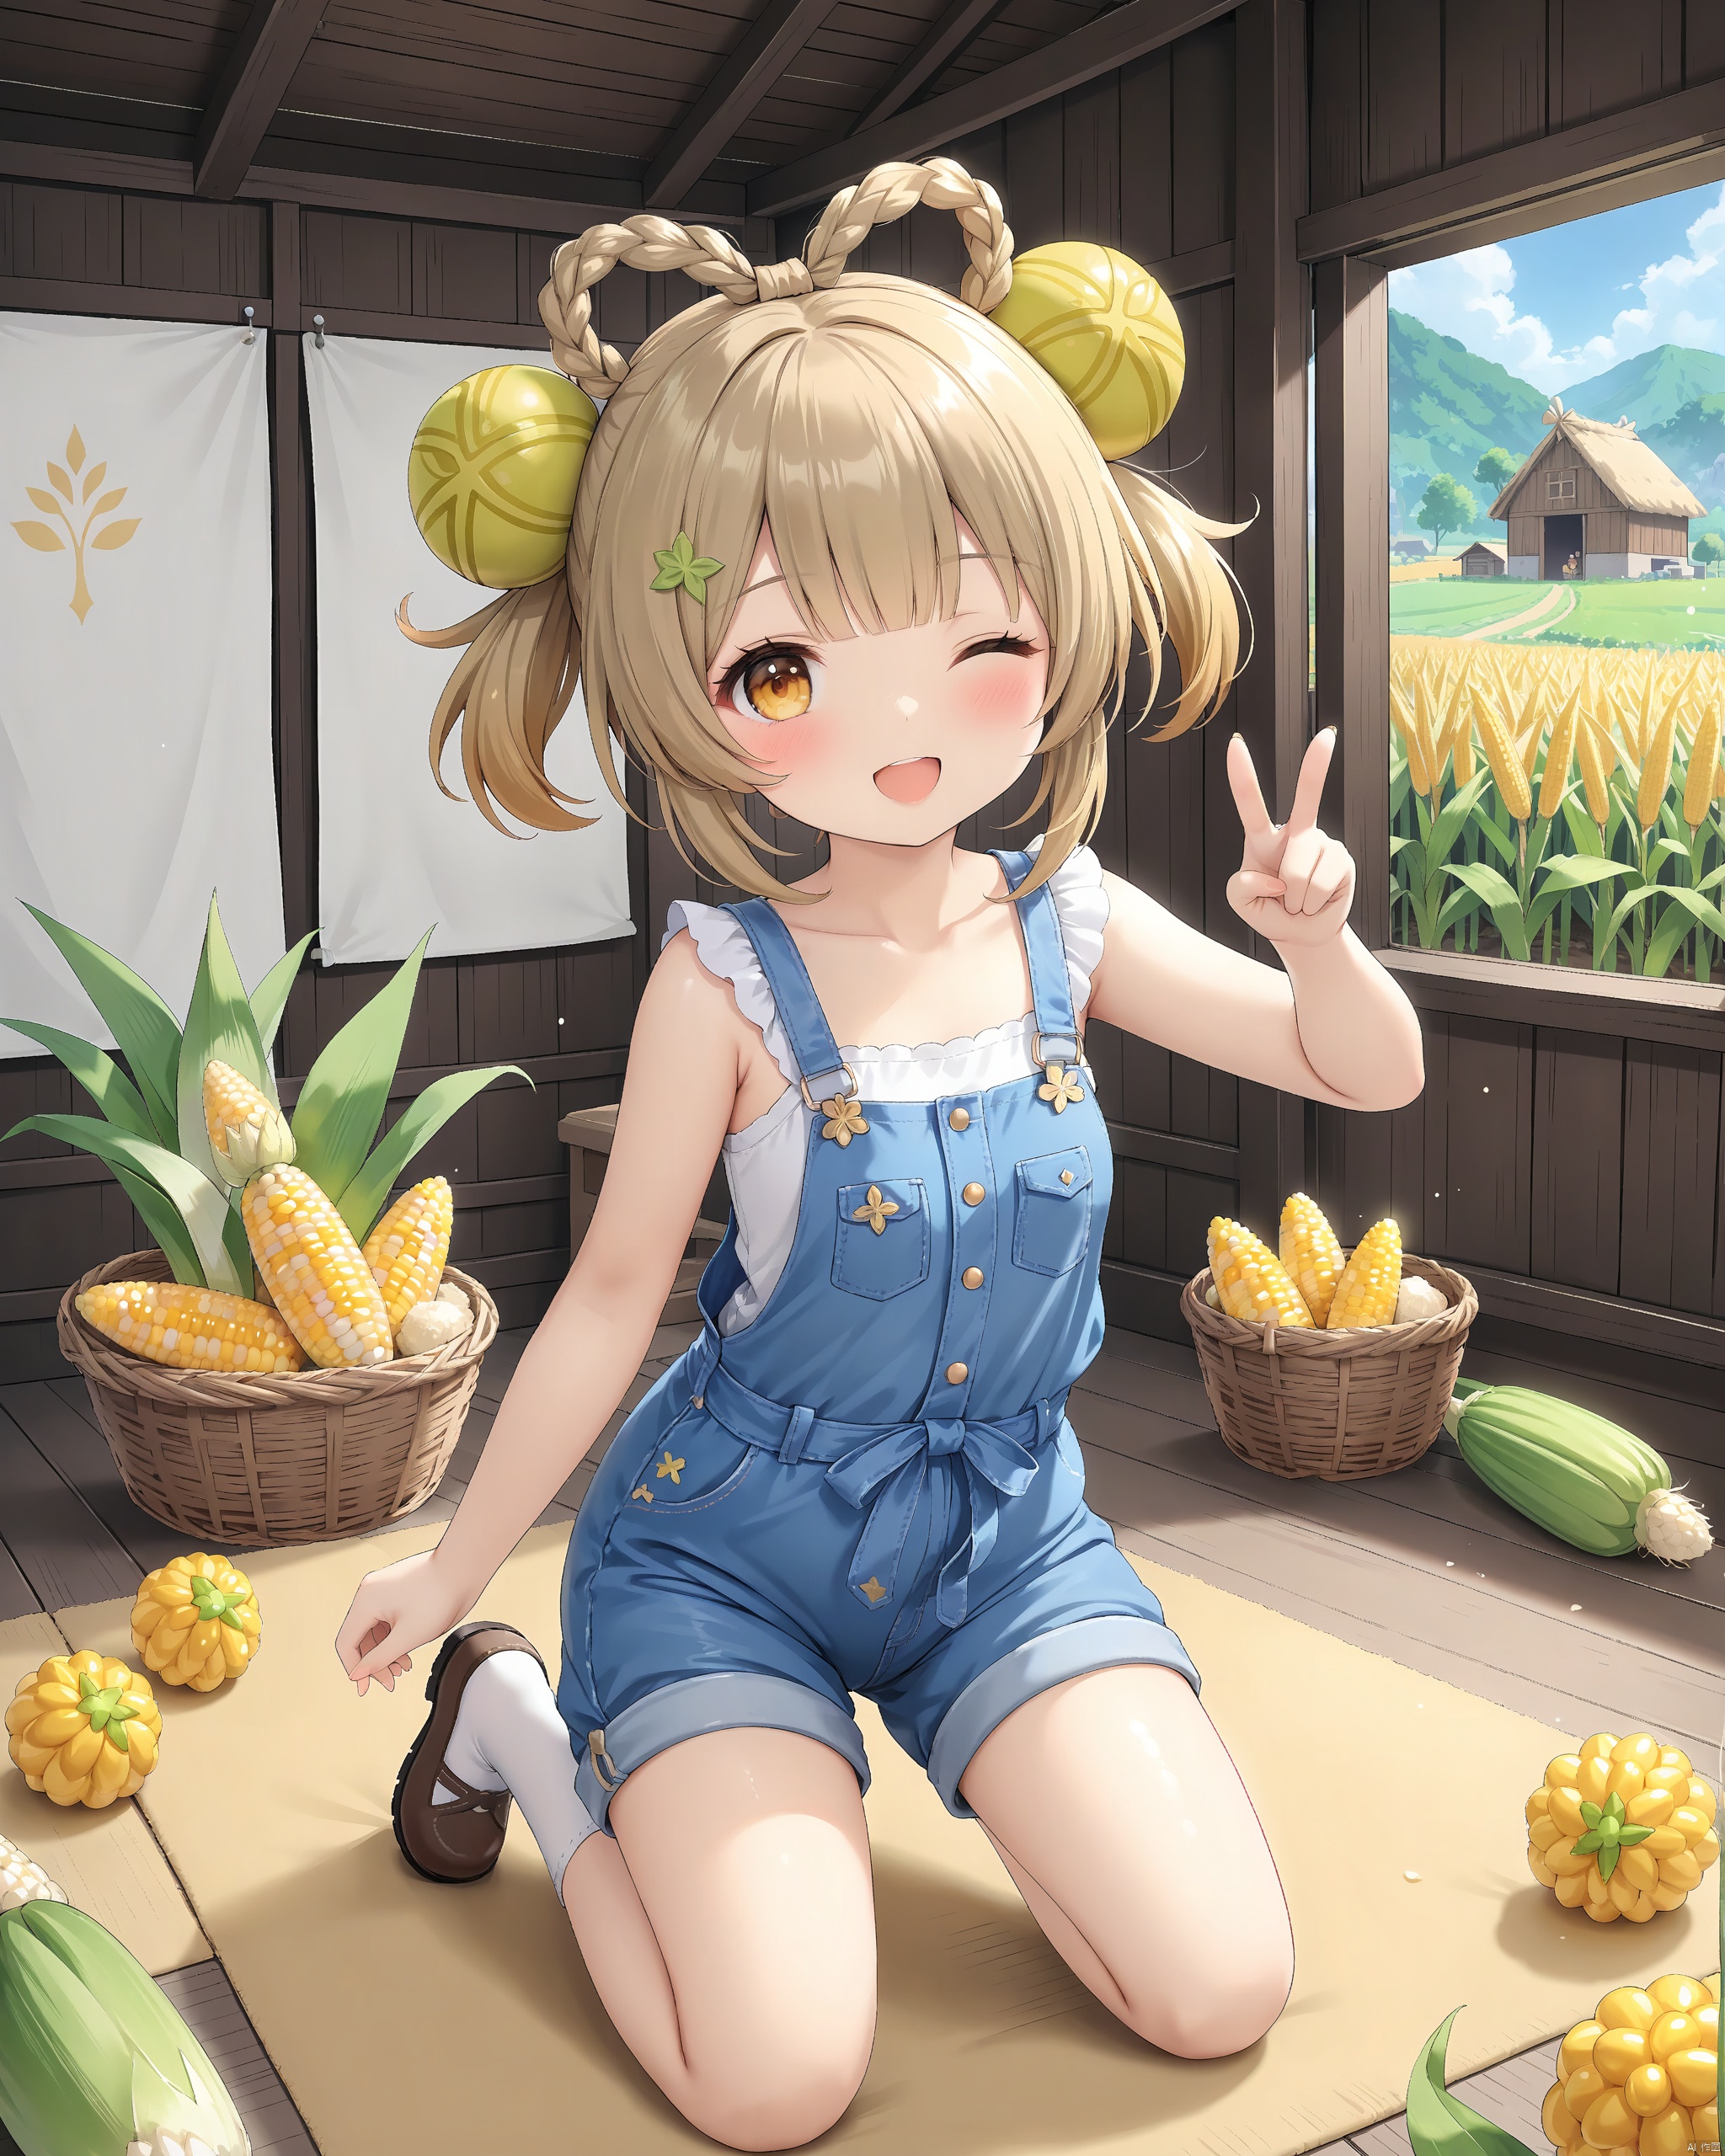 masterpiece,best quality,high quality,(colorful),1girl, solo, petite,small breast,small head, :) ,looking at viewer, blush,masterpiece,bestquality, cuteloliface,
yaoyao (genshin impact),
PVC, onnk,
Stand,Farm,Corn heaps,A straw house
smile,open_mouth,
(Denim overalls:1.4),closed one eye,Fingers pointing forward,kneeling

